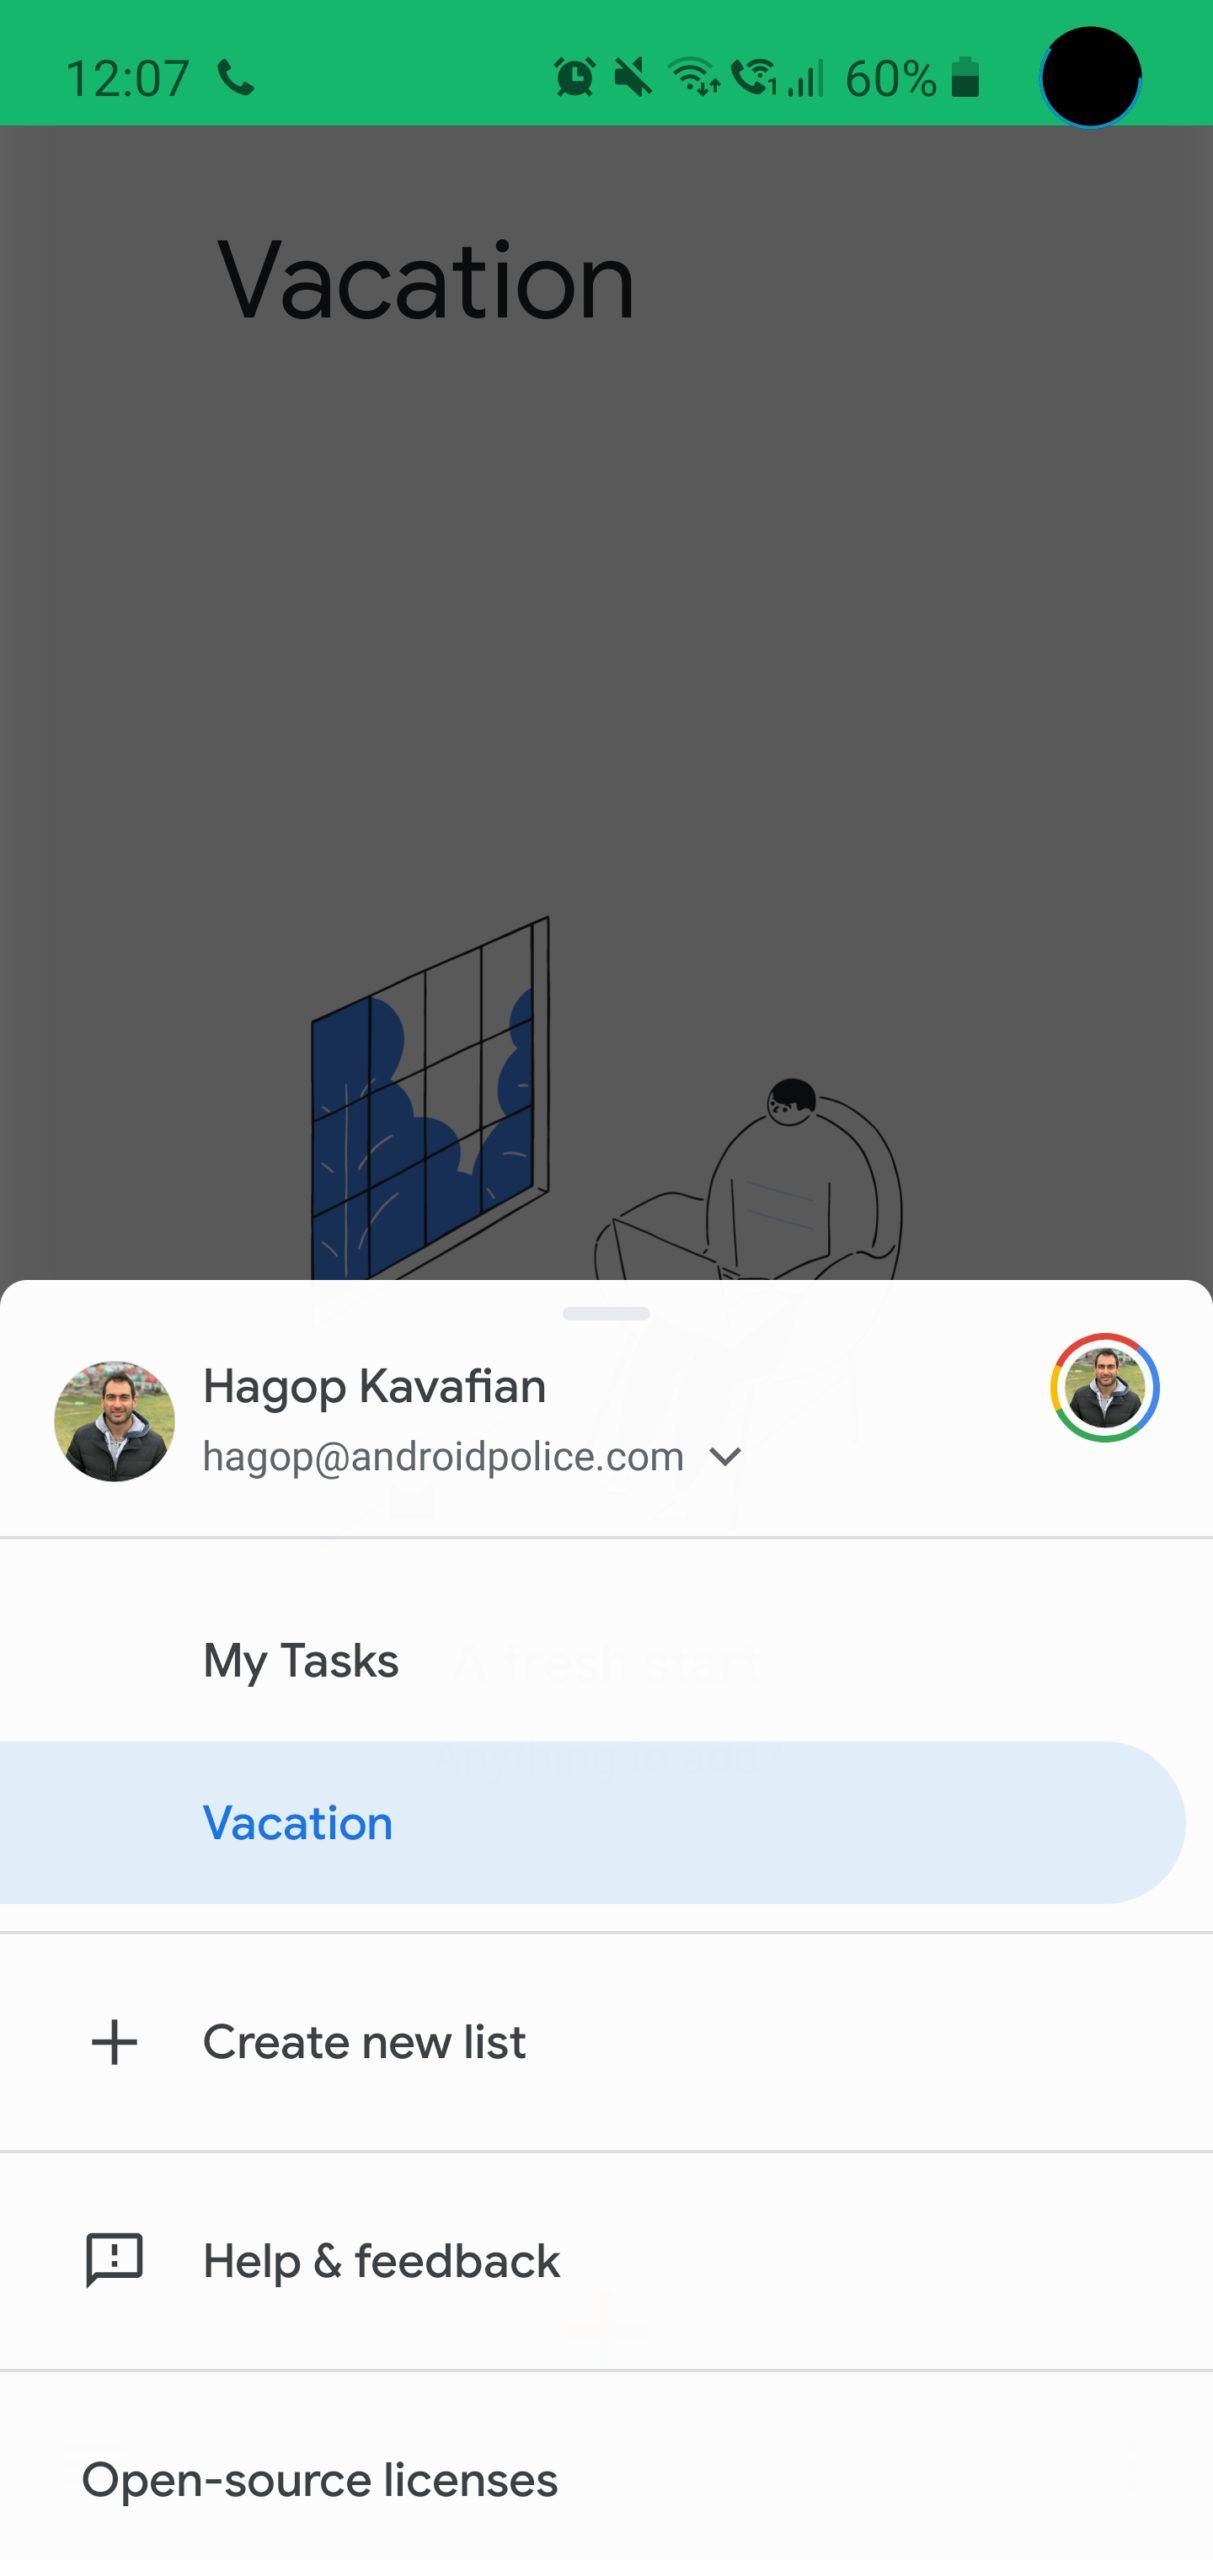 Showing a new task called Vacation in the Google Tasks app